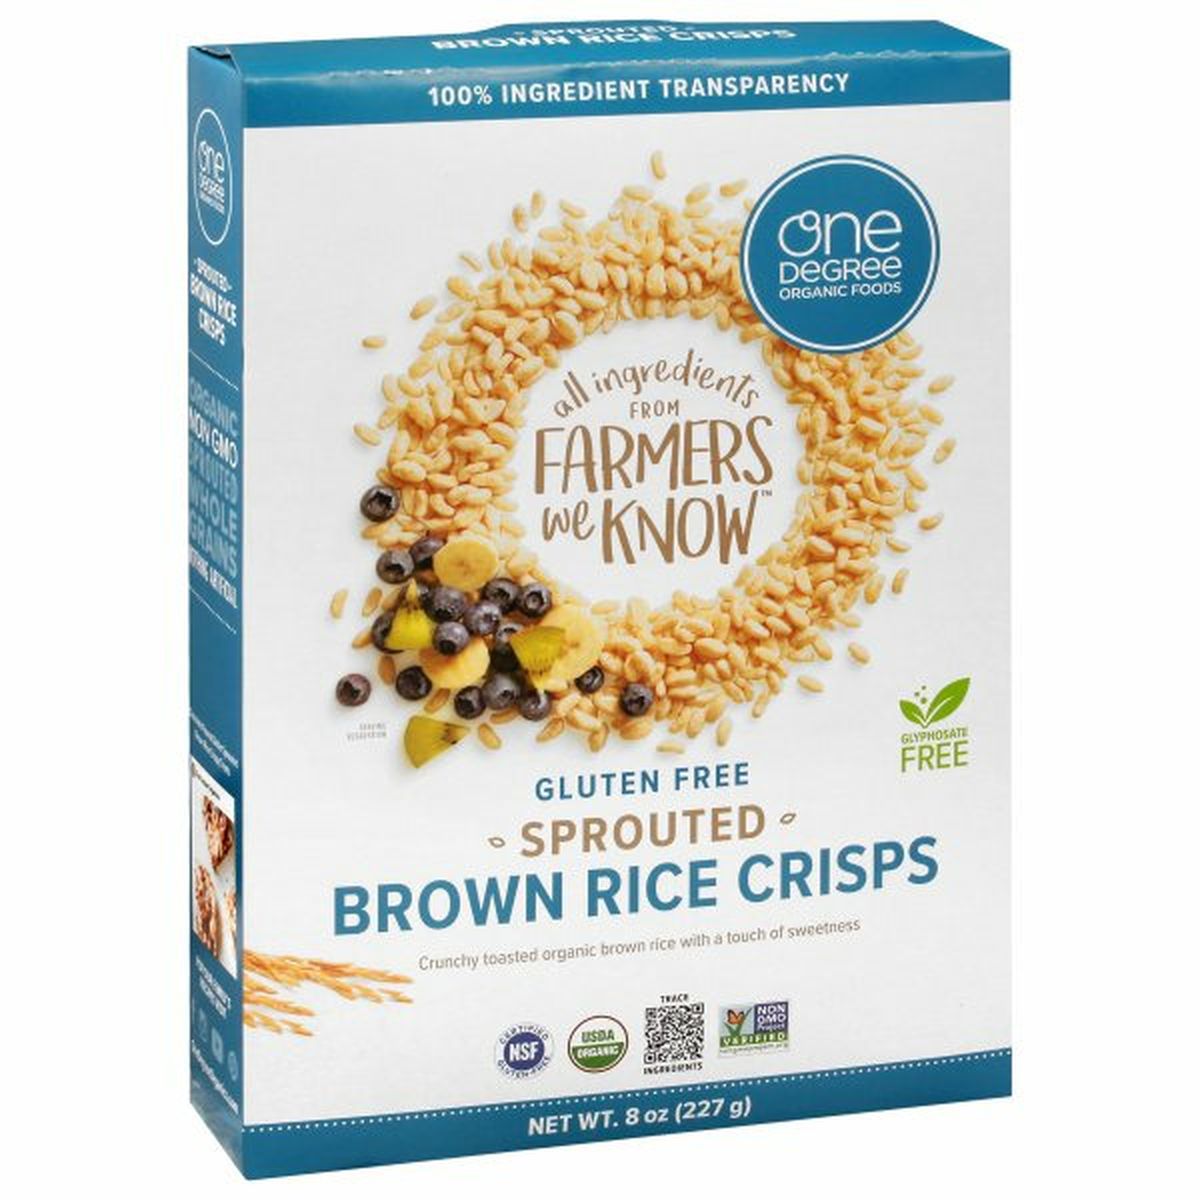 Calories in One Degree Organic Foods Brown Rice Crisps, Gluten Free, Sprouted